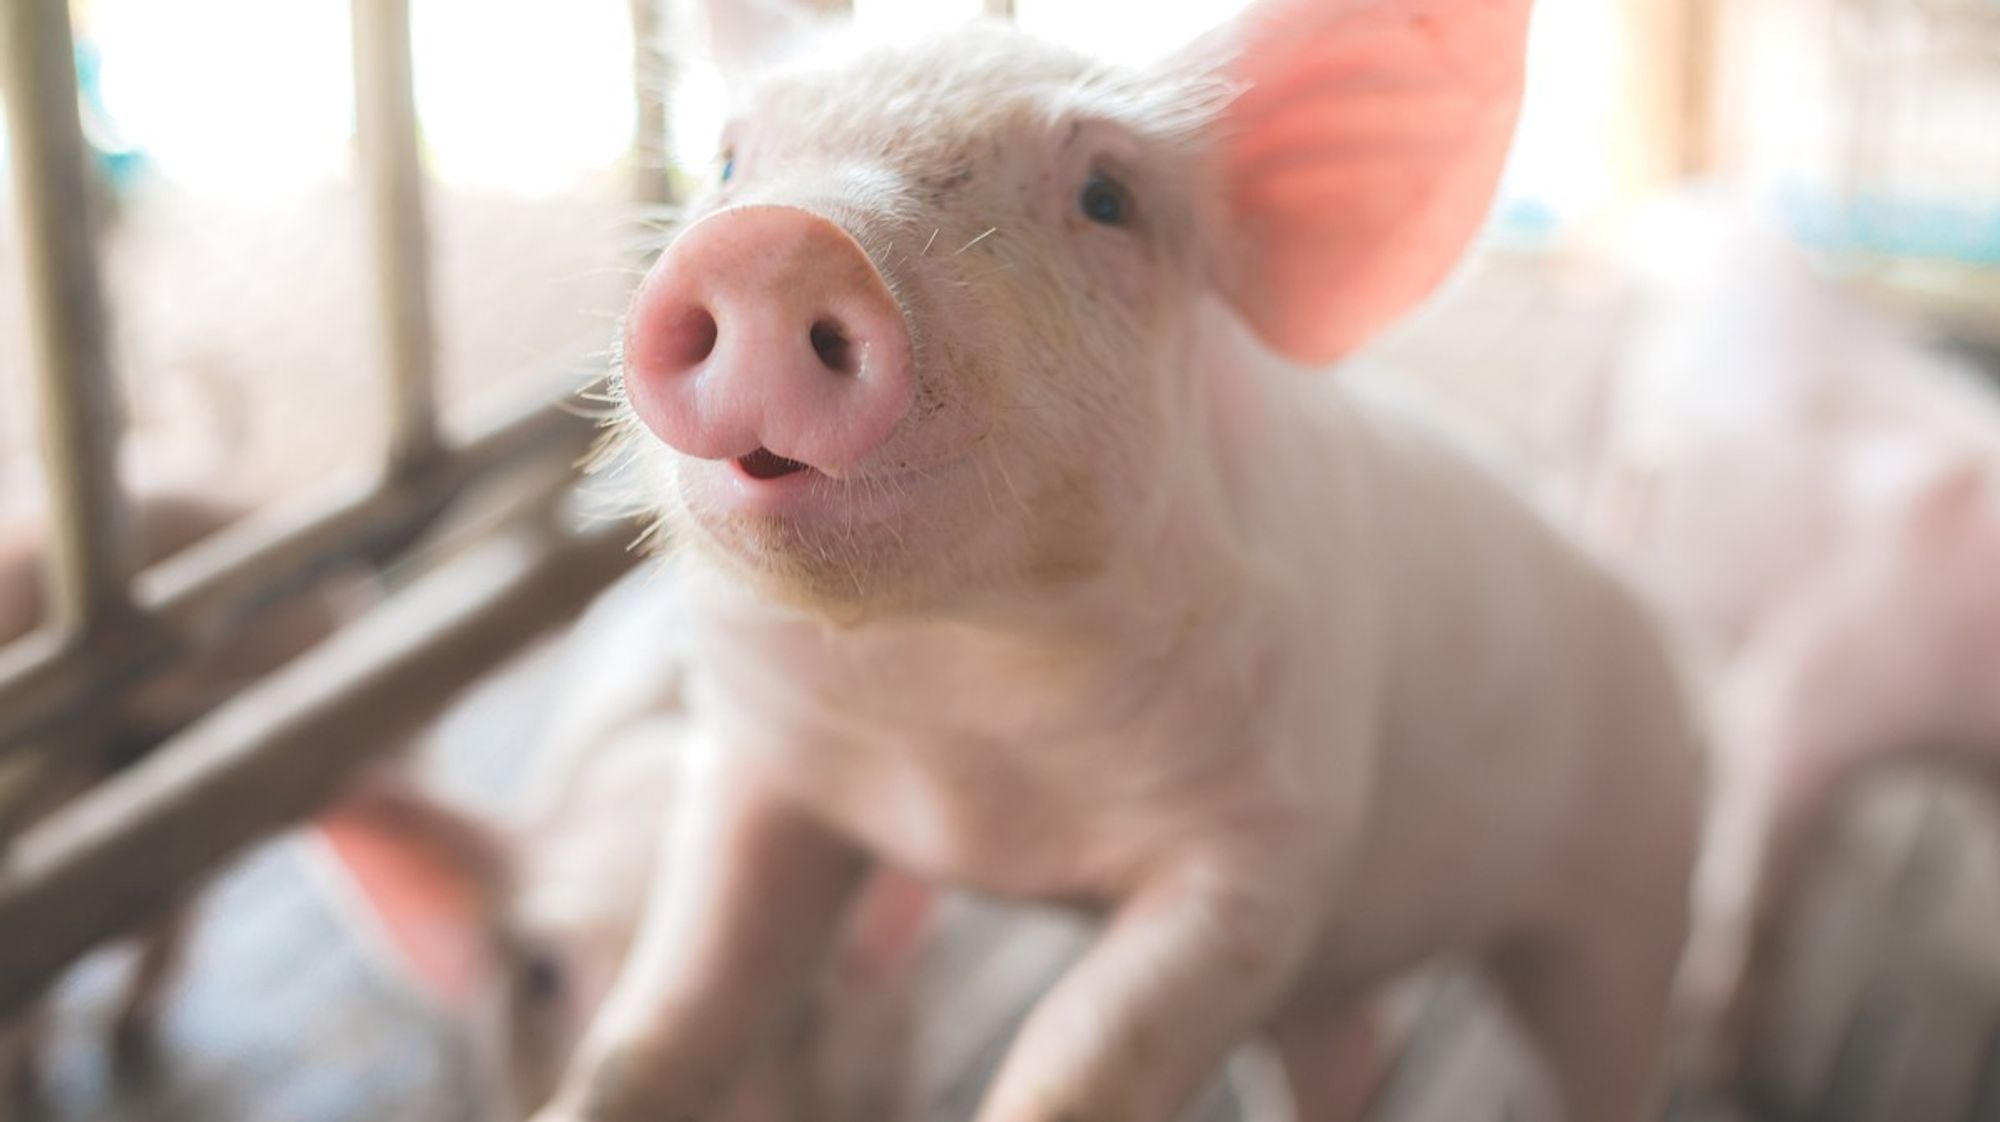 Pig Kidney Successfully Transplanted From Hog to Human